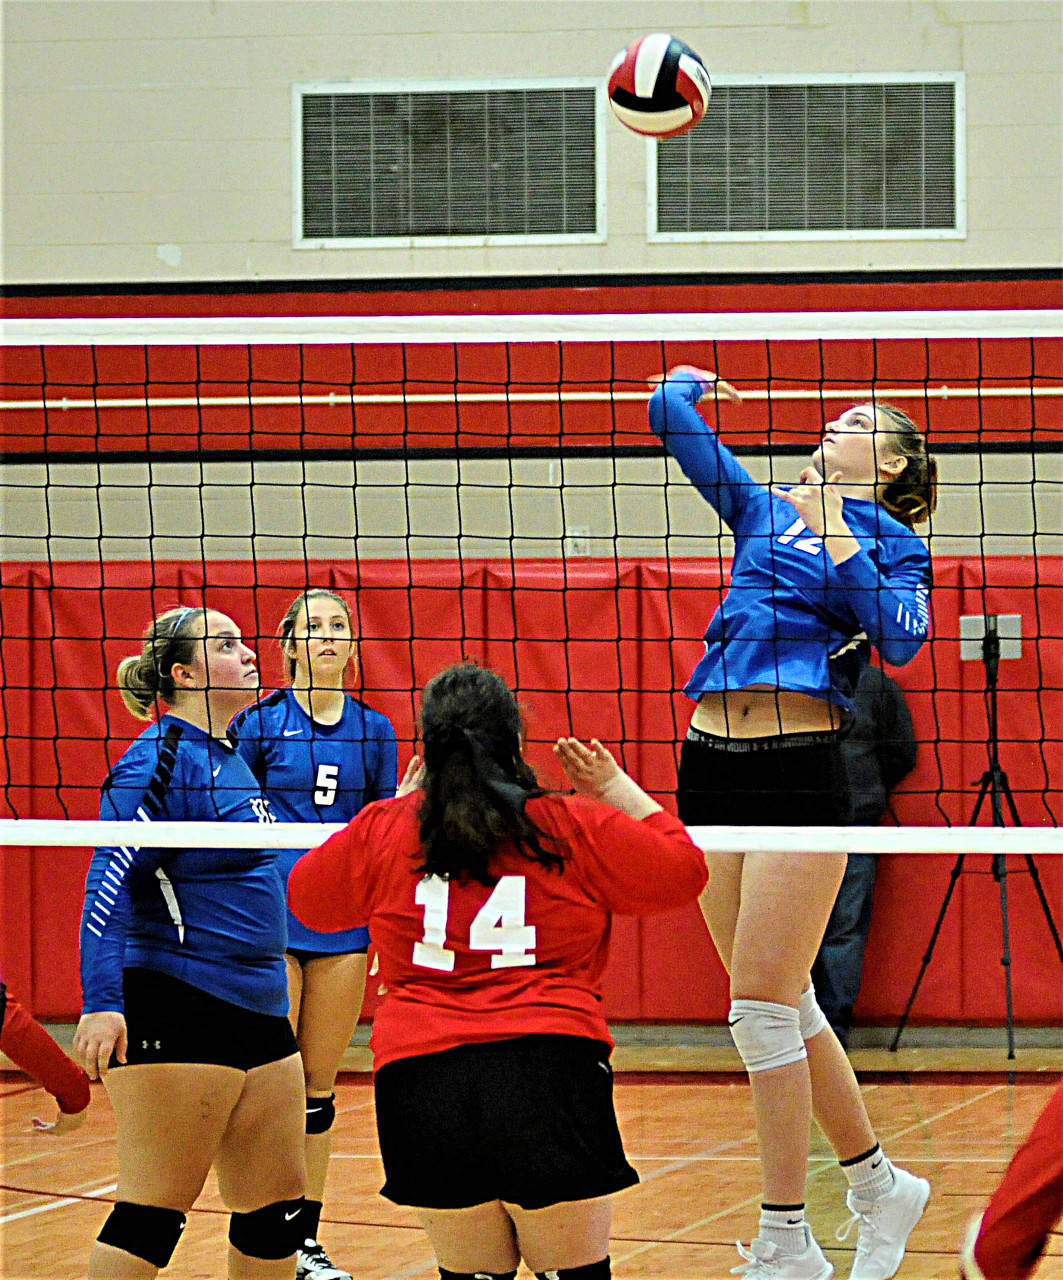 Jalyn Sackrider gets a kill against Tenino on Thursday. Sackrider was tied for the team lead in kills with 10 in the Eagles’ 3-0 win over the Beavers. (Hasani Grayson | Grays Harbor News Group)